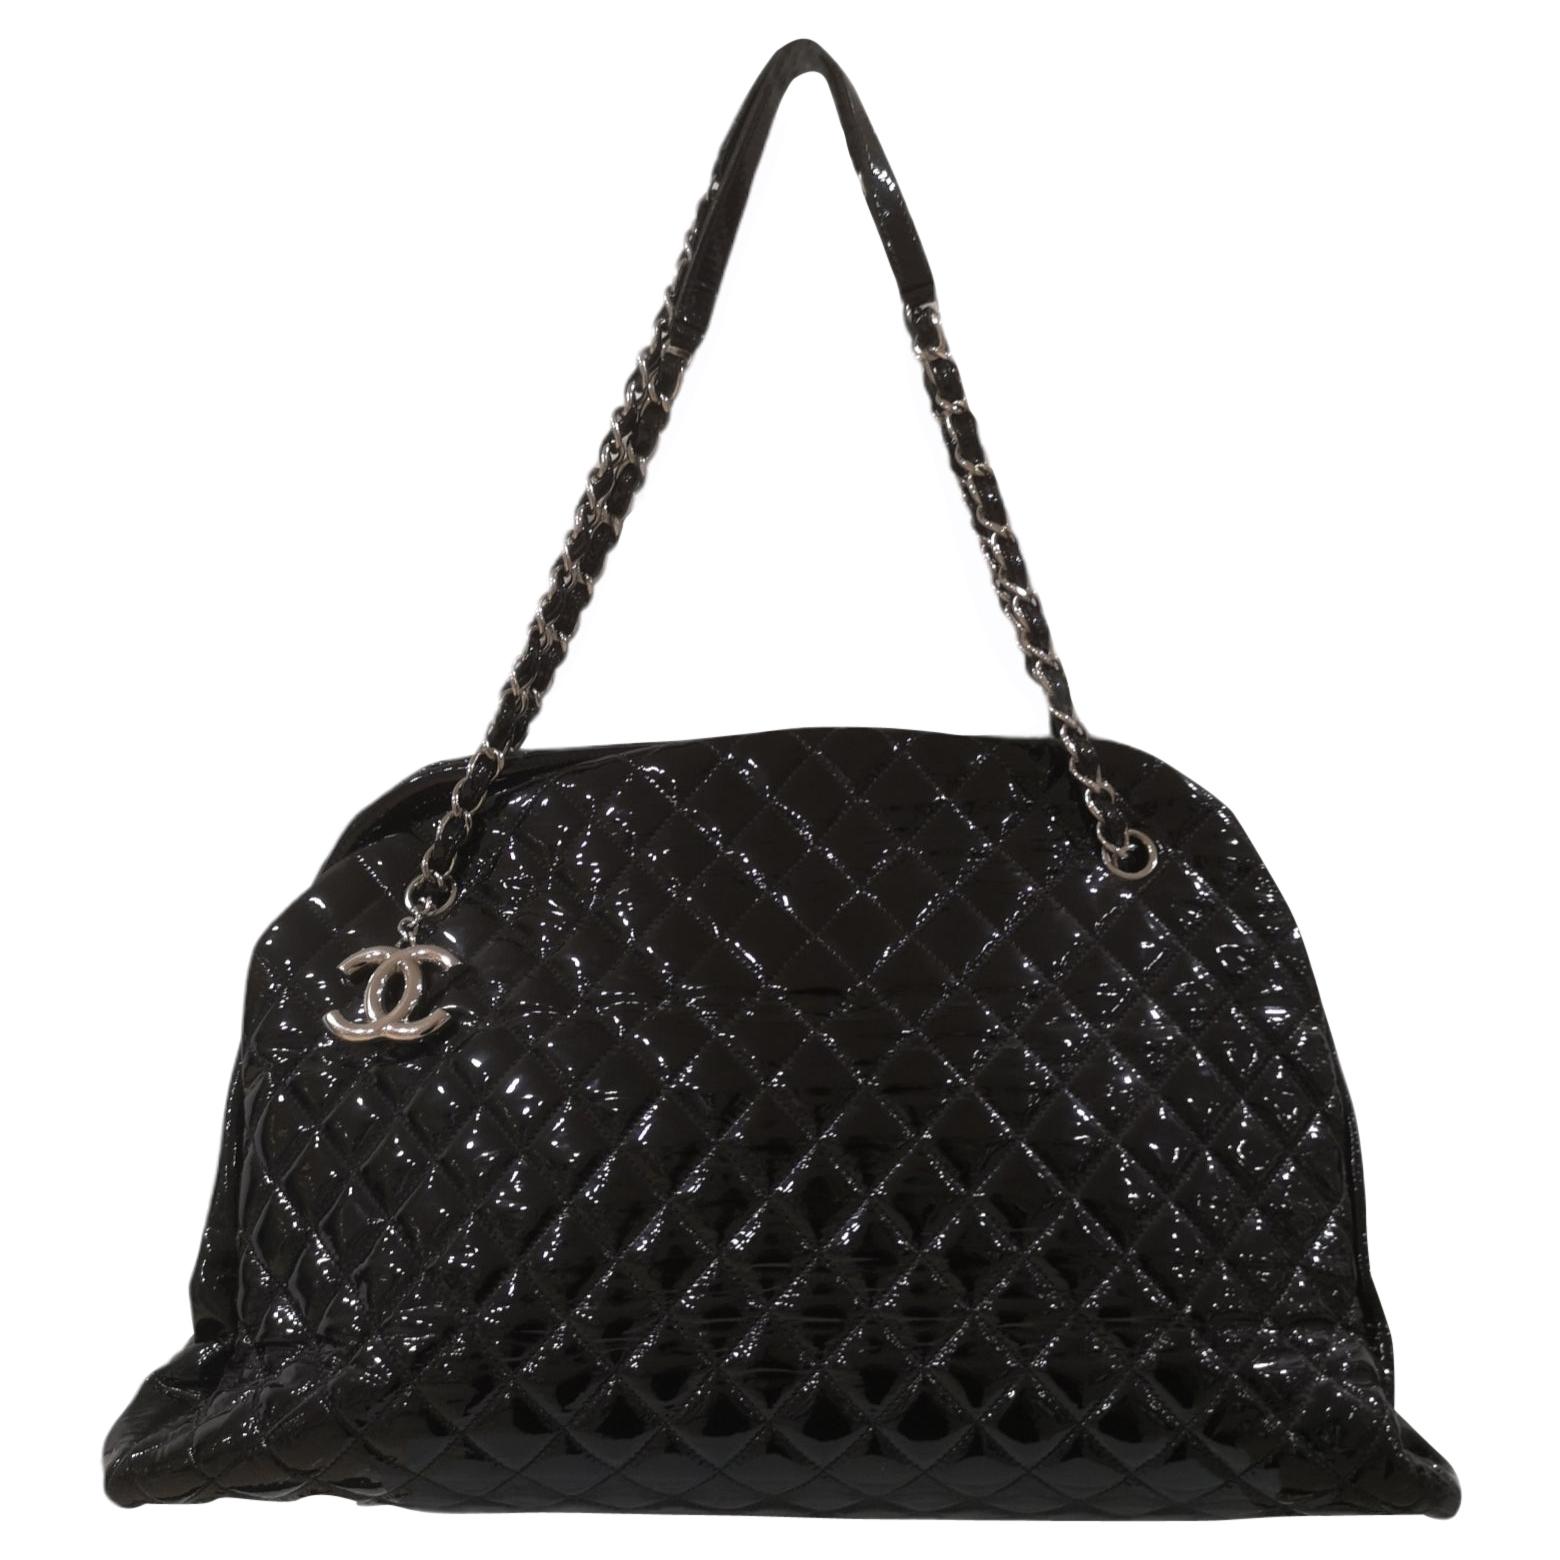 Chanel Just Mademoiselle Bowler Black patent Leather Bag